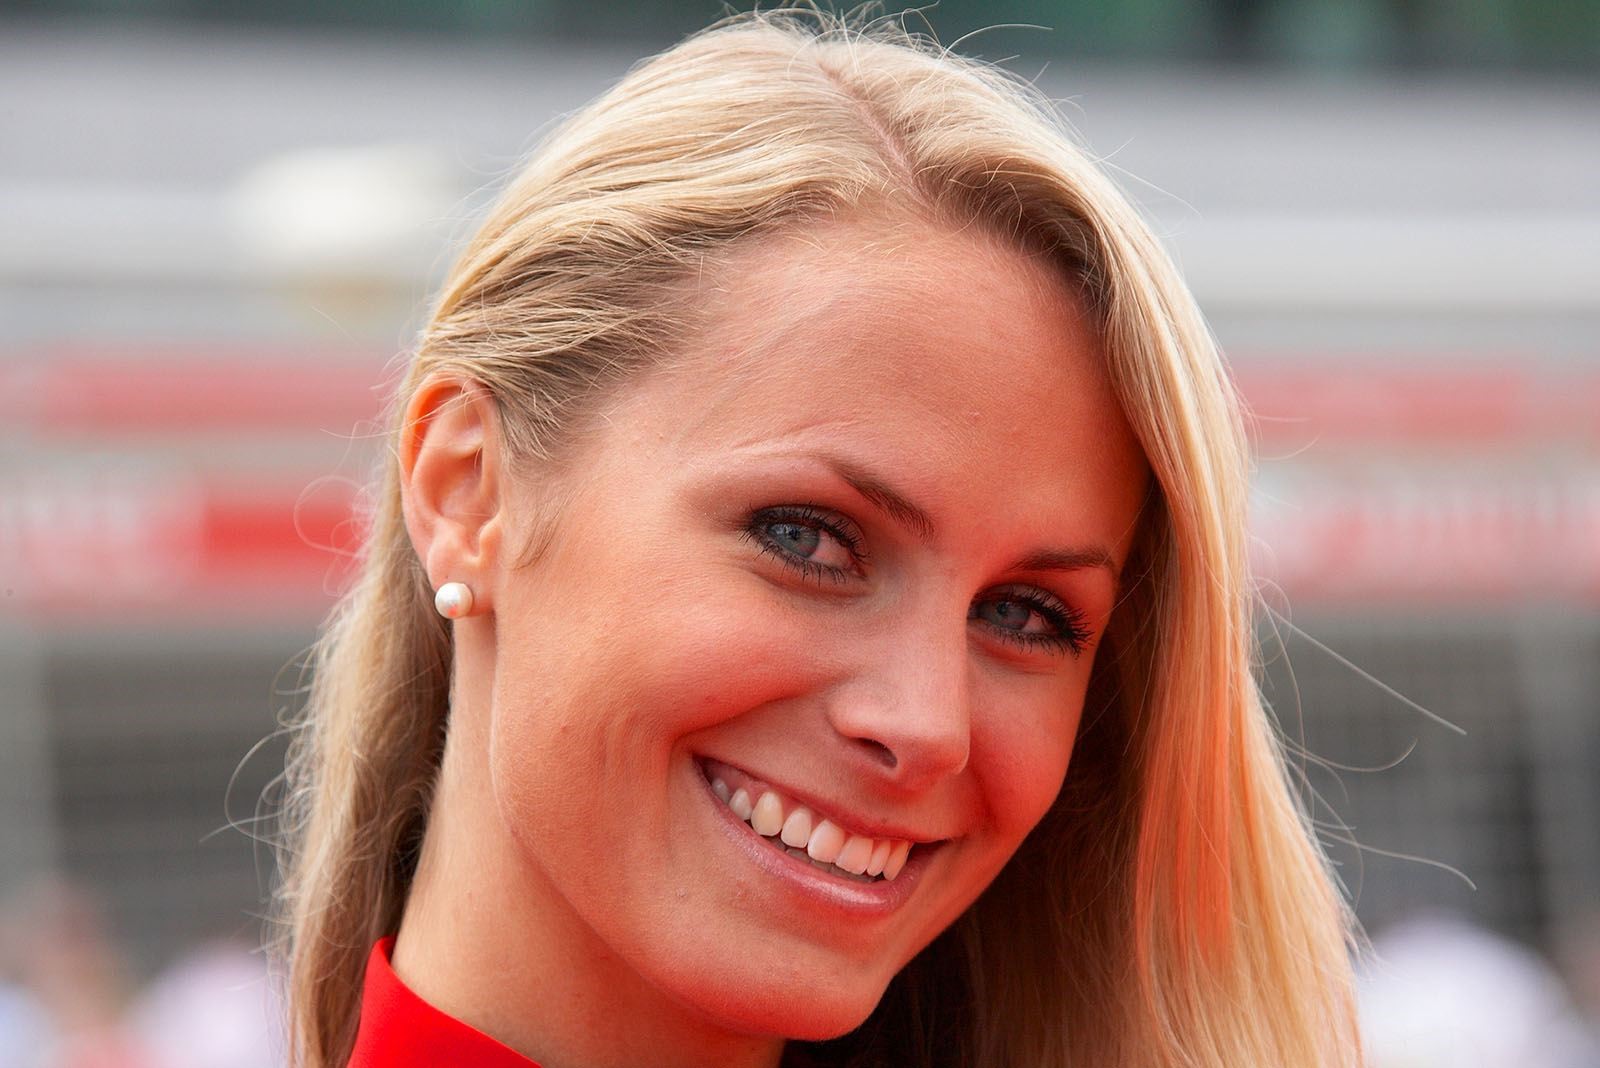 Formula 1, a girl at Silverstone, Great Britain, in 2011. 